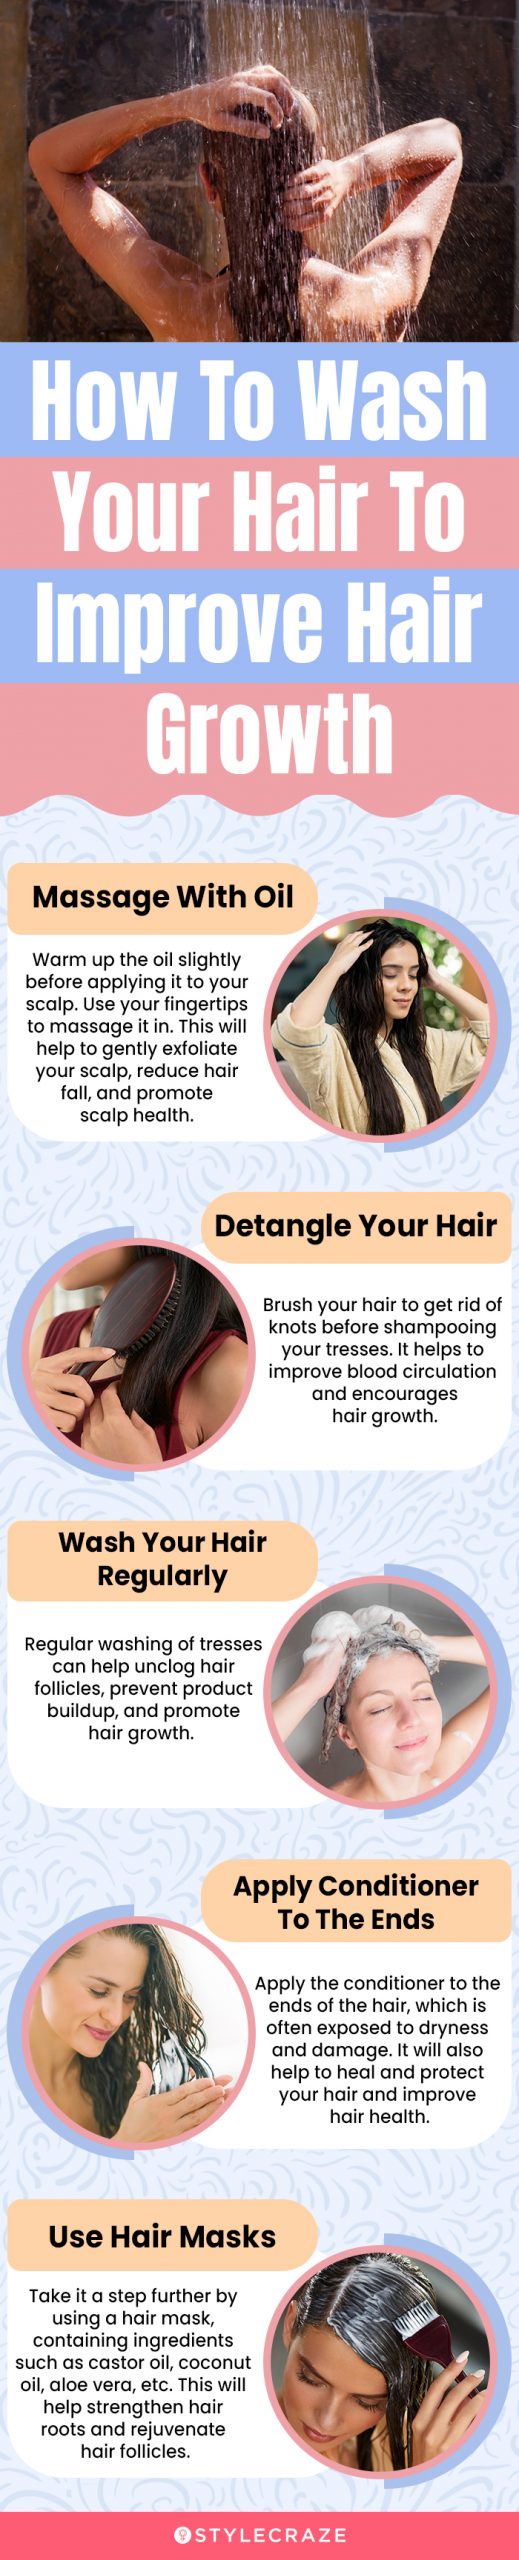 How To Wash Your Hair To Improve Hair Growth (infographic)